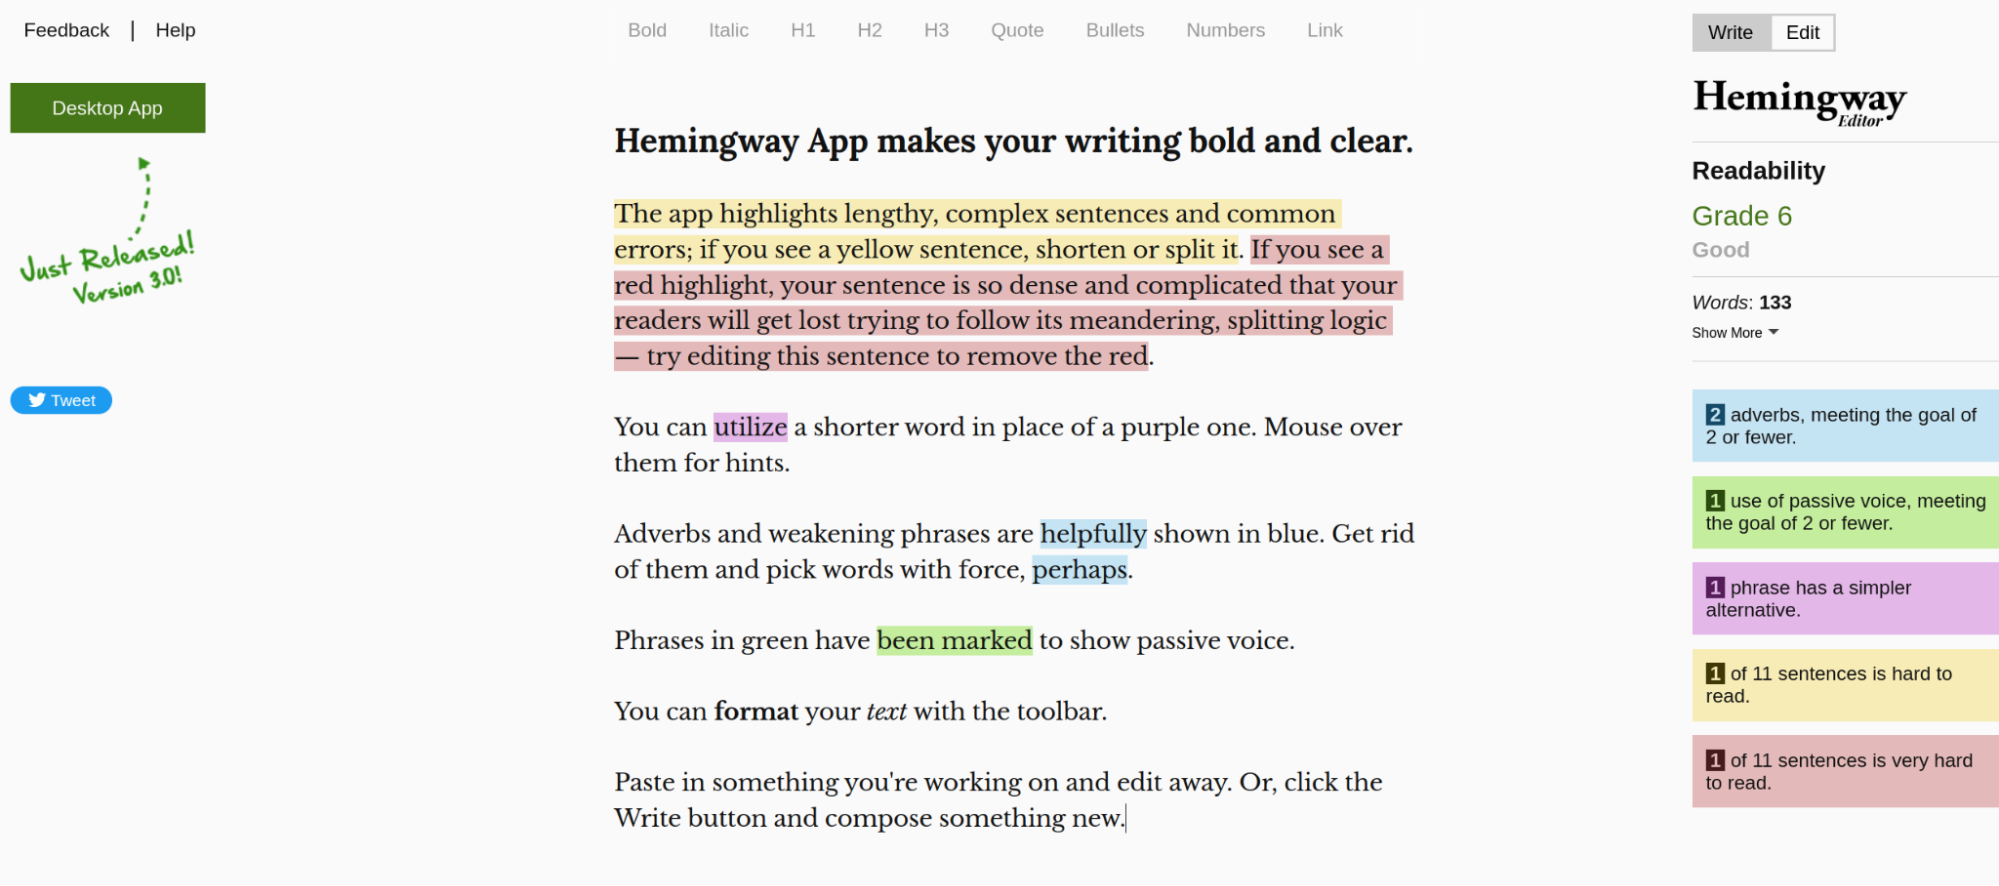 Tool for improving readability and clarity of texts - Hemingway Editor